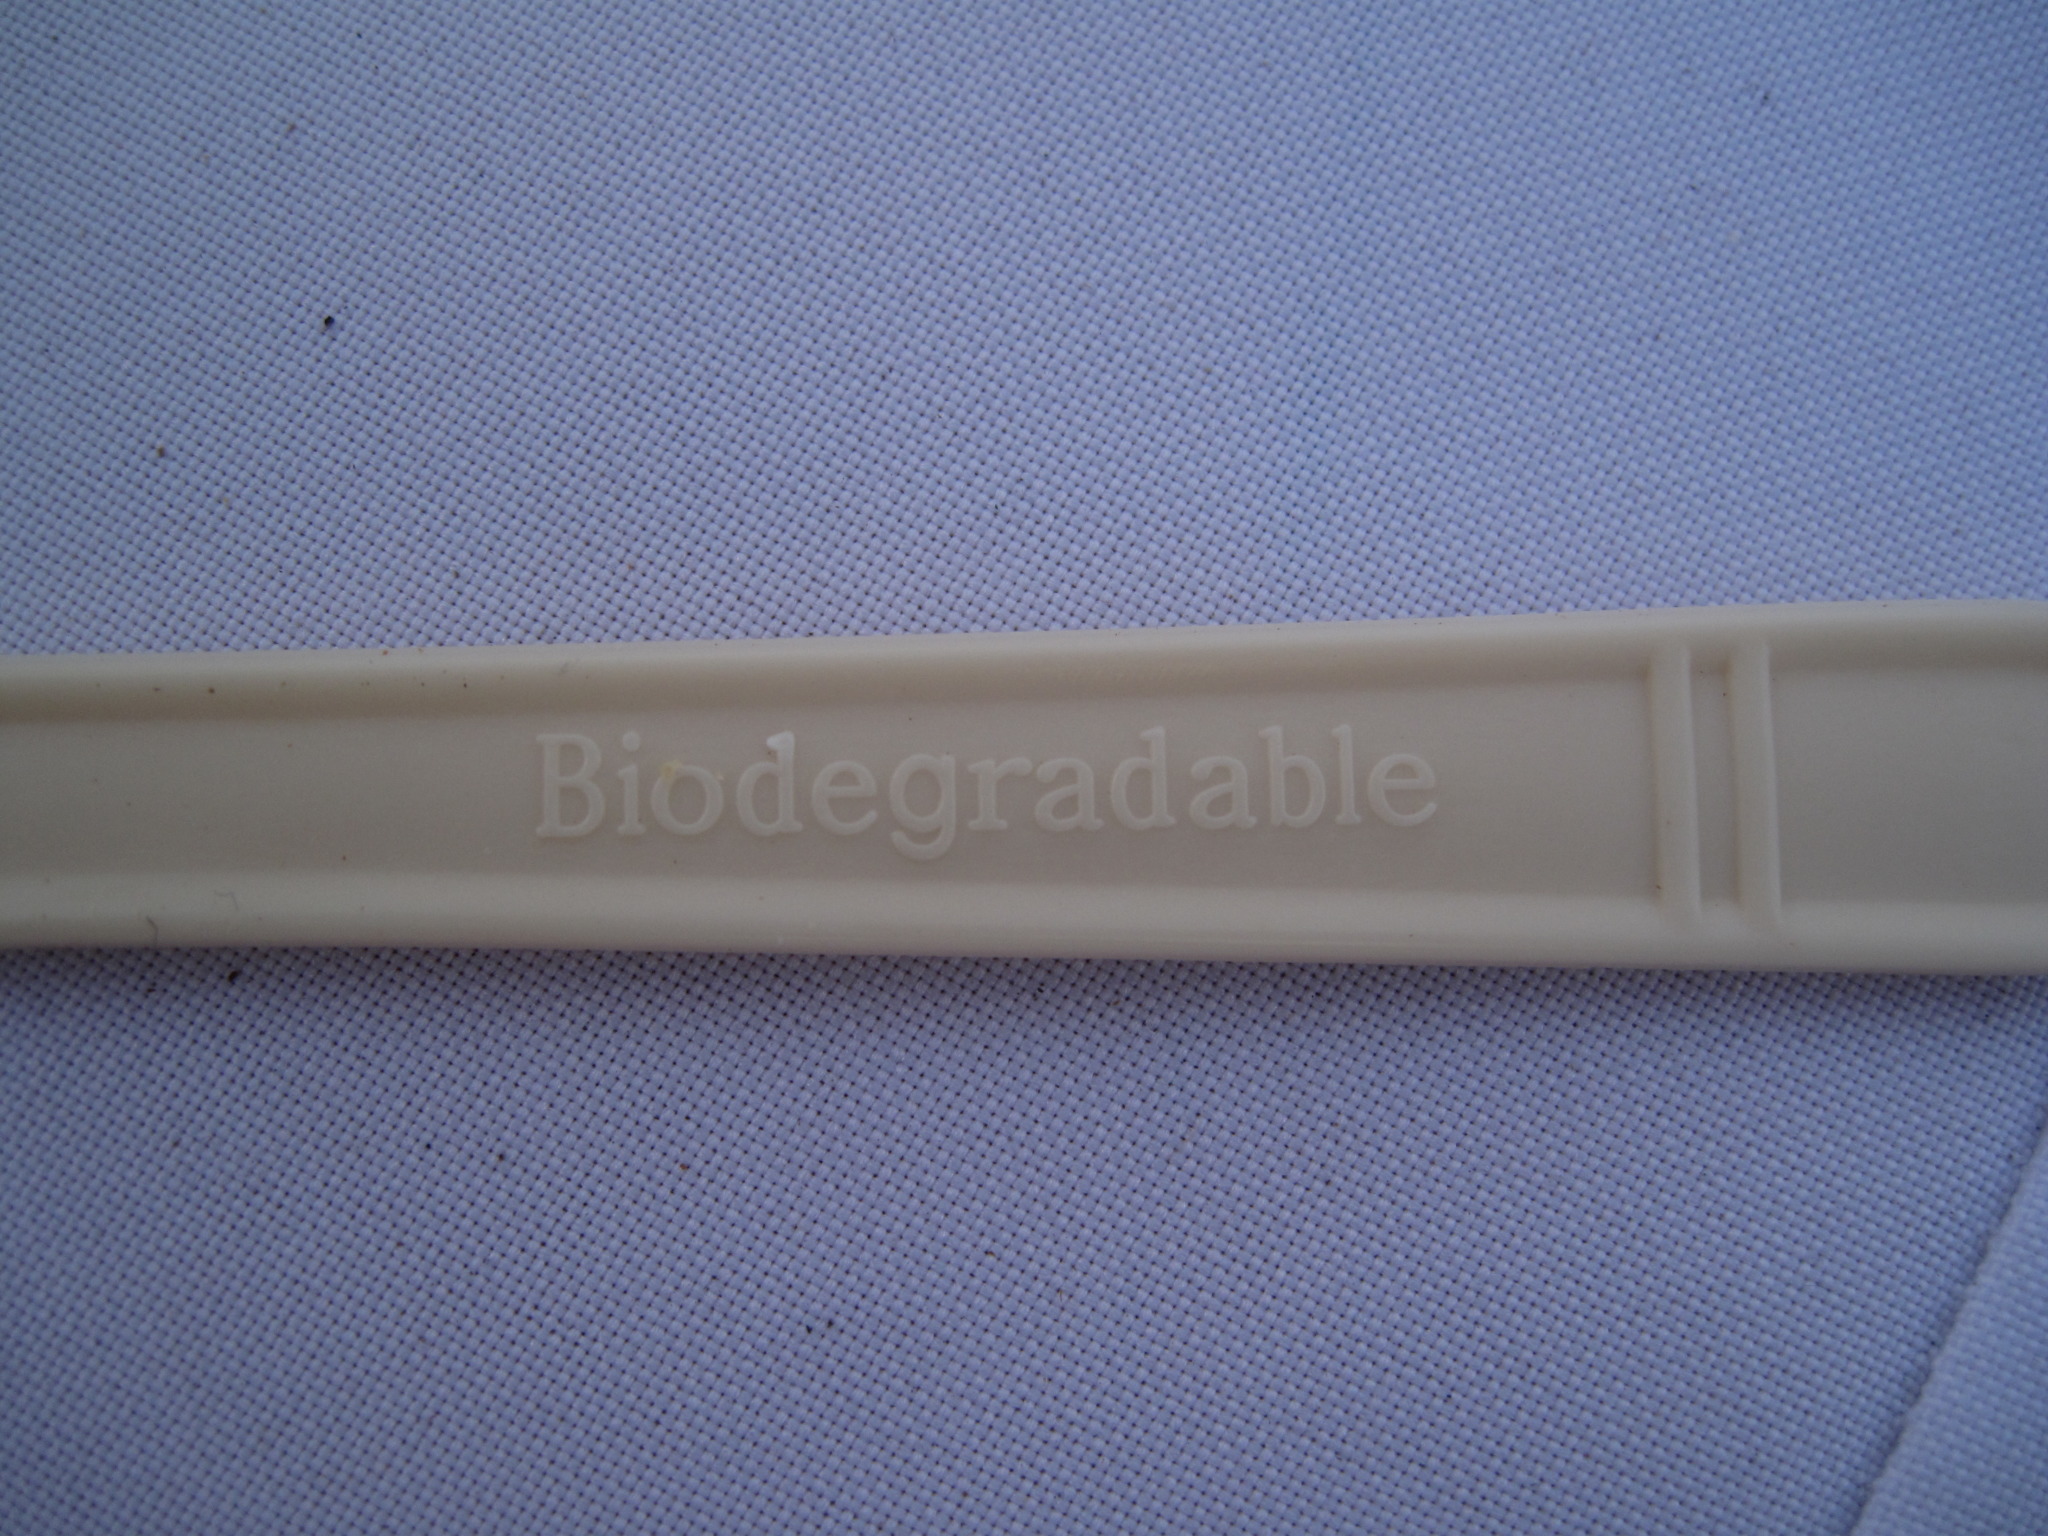 close up of the word biodegradable on the back of a biodegradable utensil